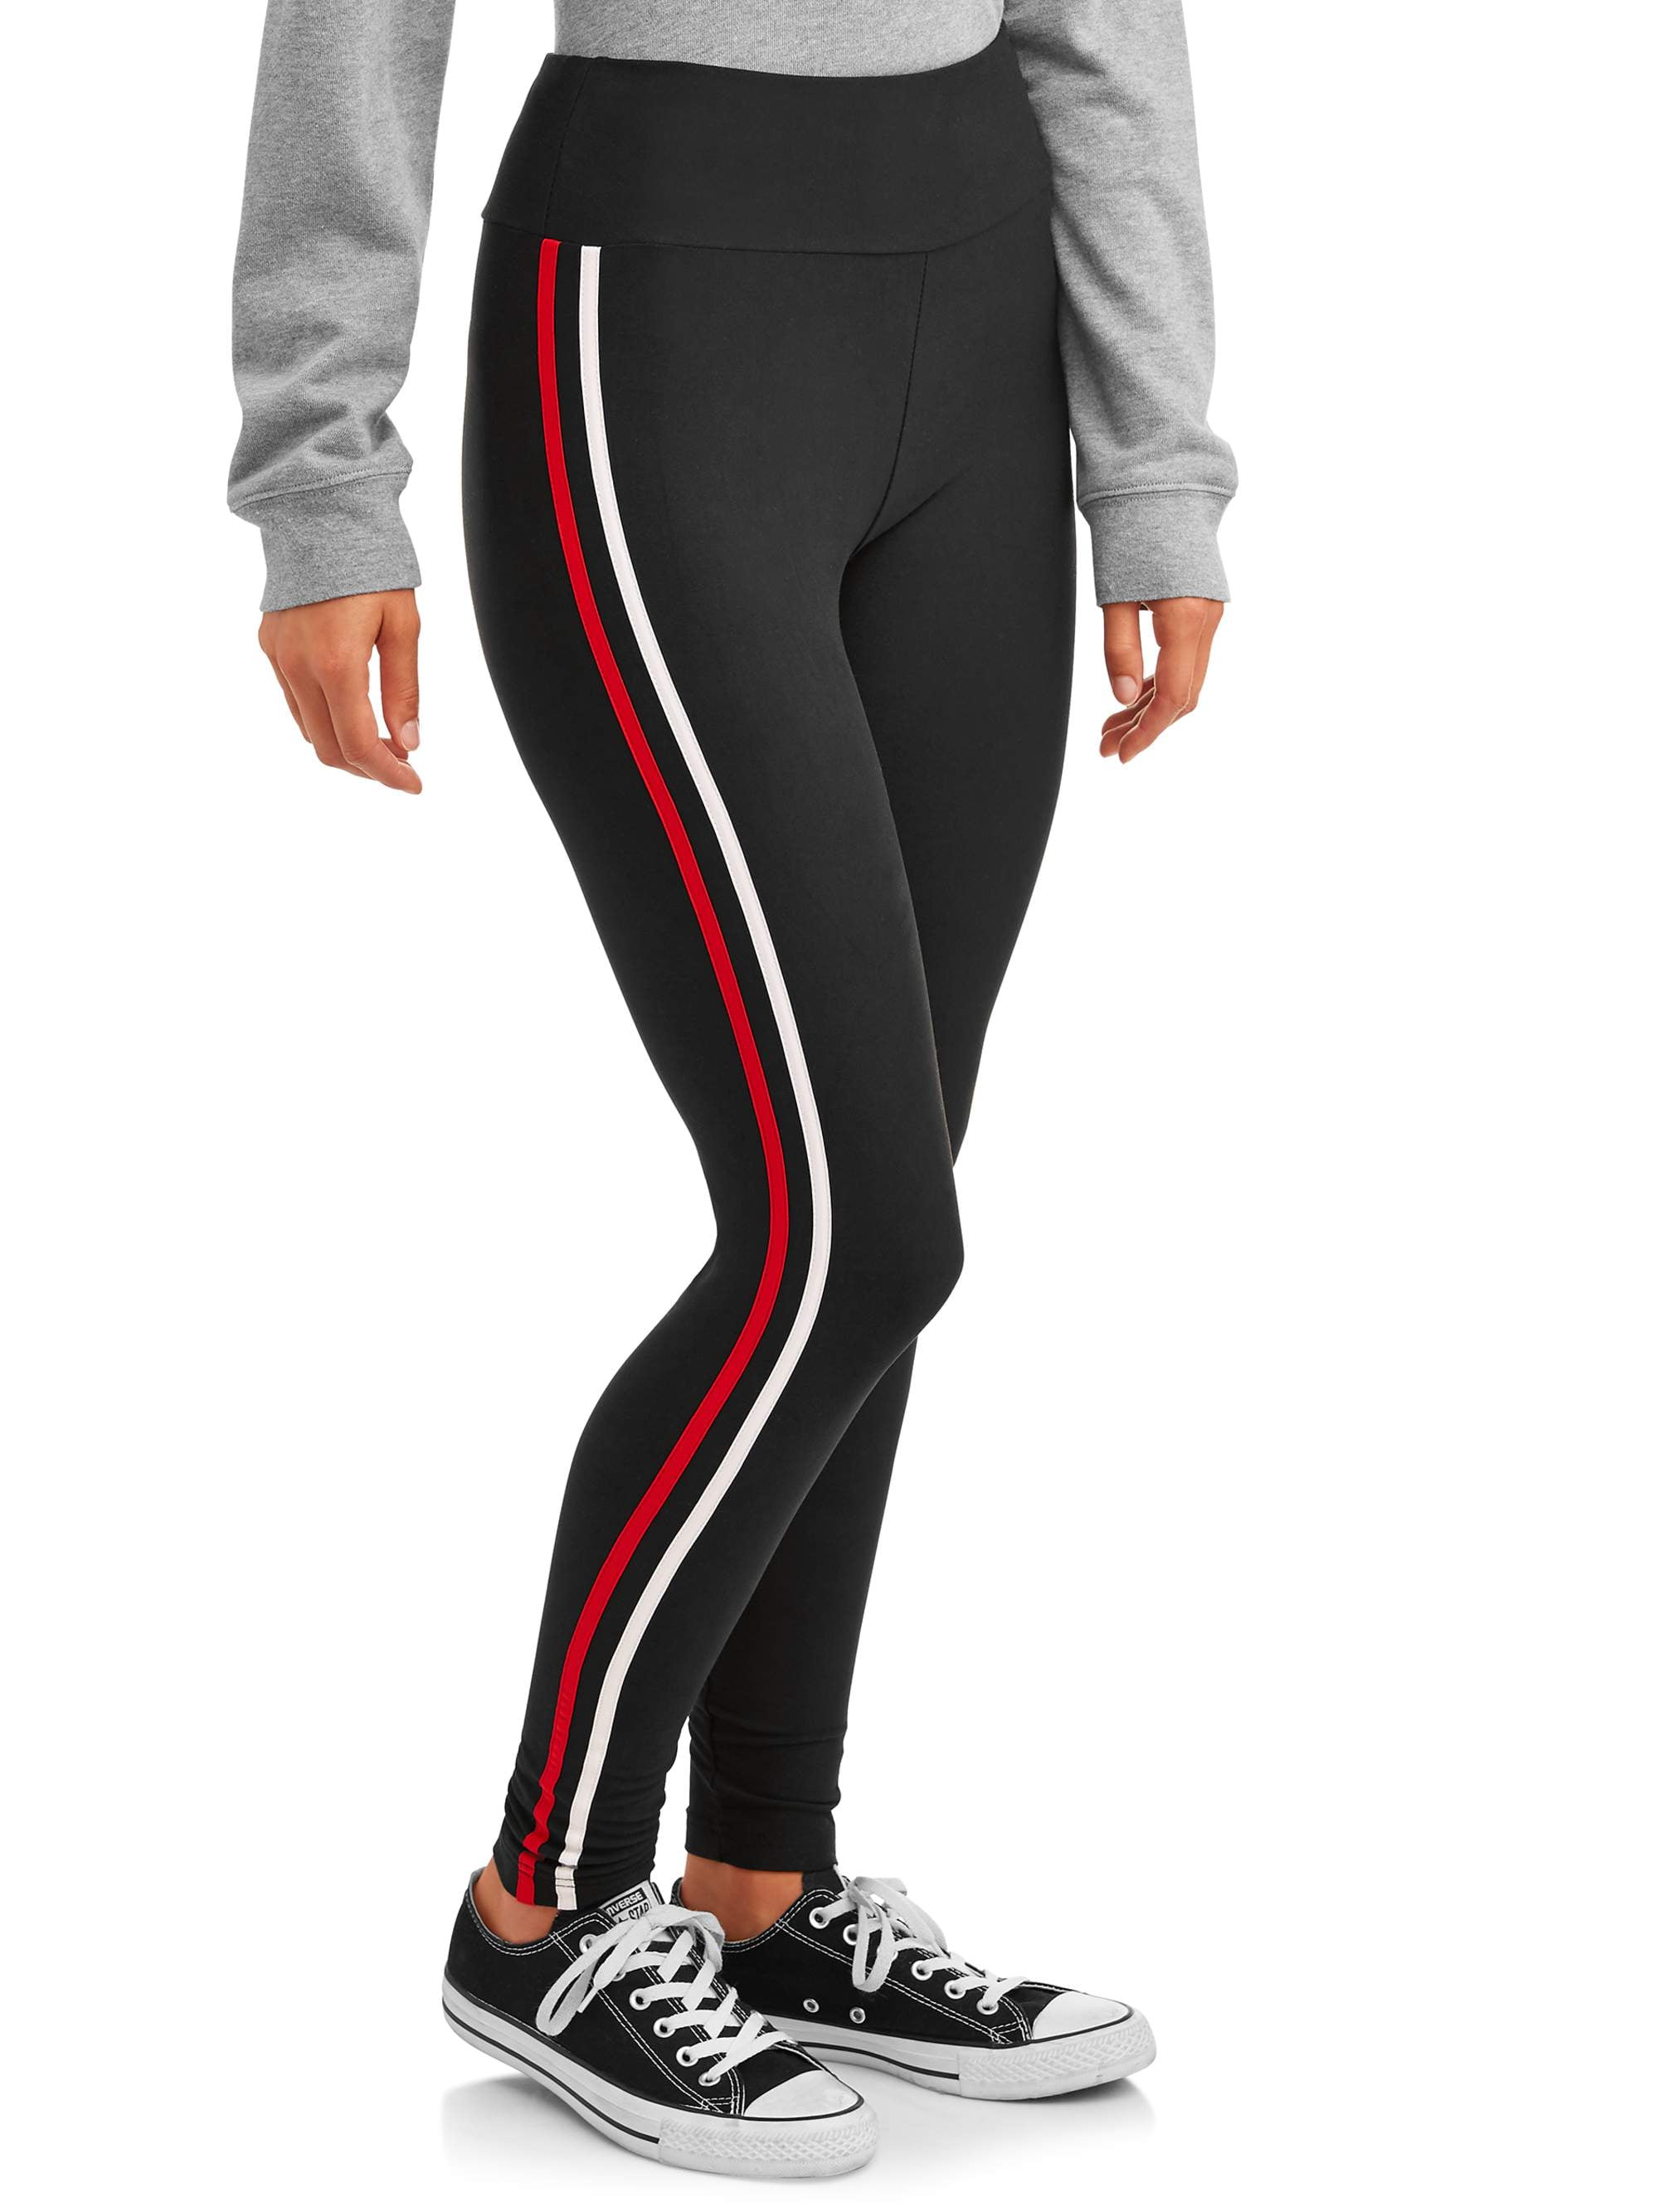 I Exclusively Wear These Flattering Fleece-Lined Leggings From